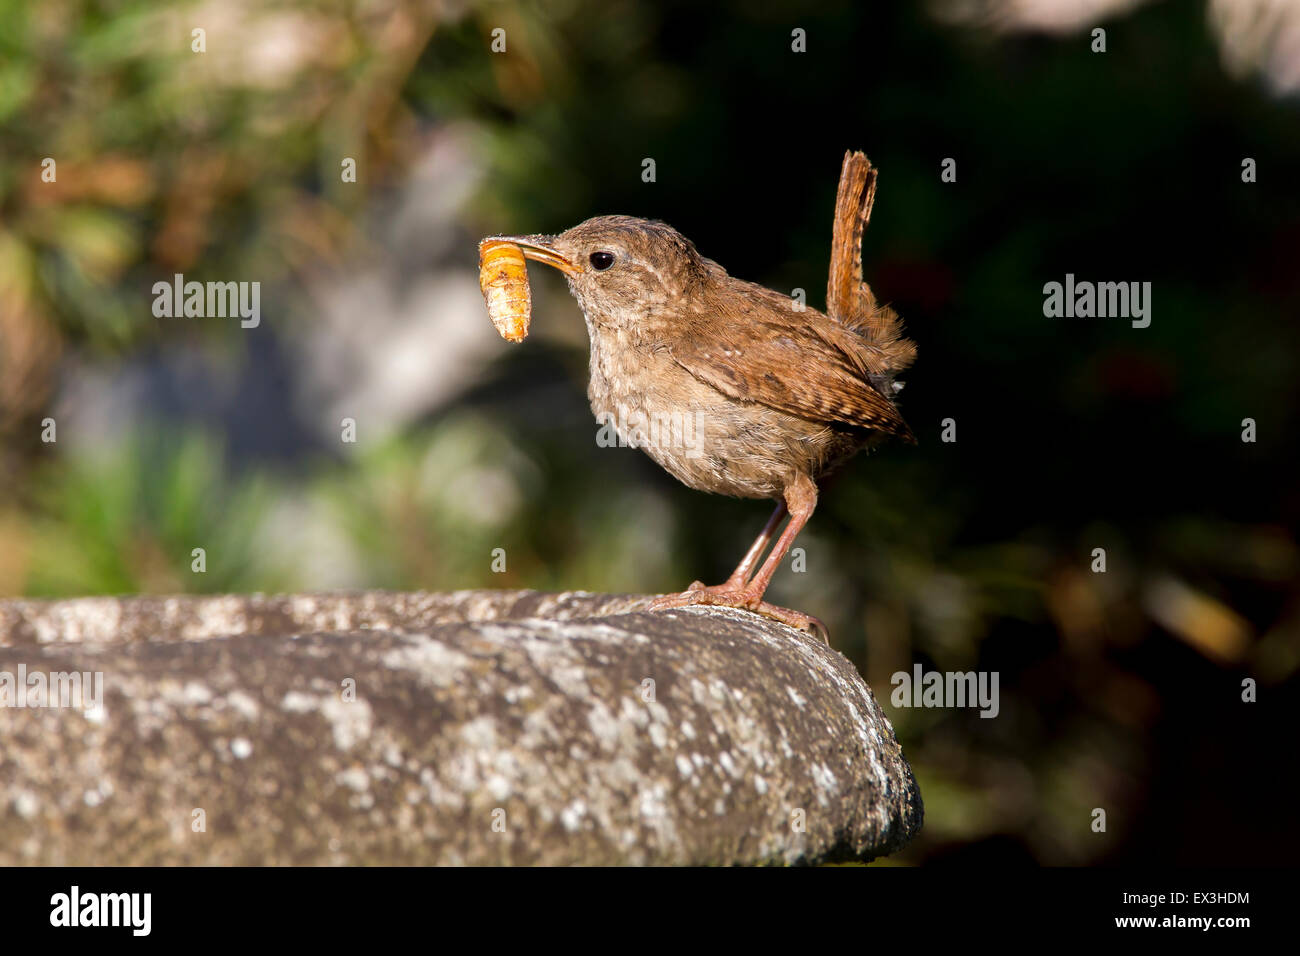 Northampton UK, 6th July 2005. The warm sunny weather is producing plenty of insects for this pair of Wren. Troglodytes troglodyter (Troglodytidae) to feed their chicks Credit:  Keith J Smith./Alamy Live News Stock Photo